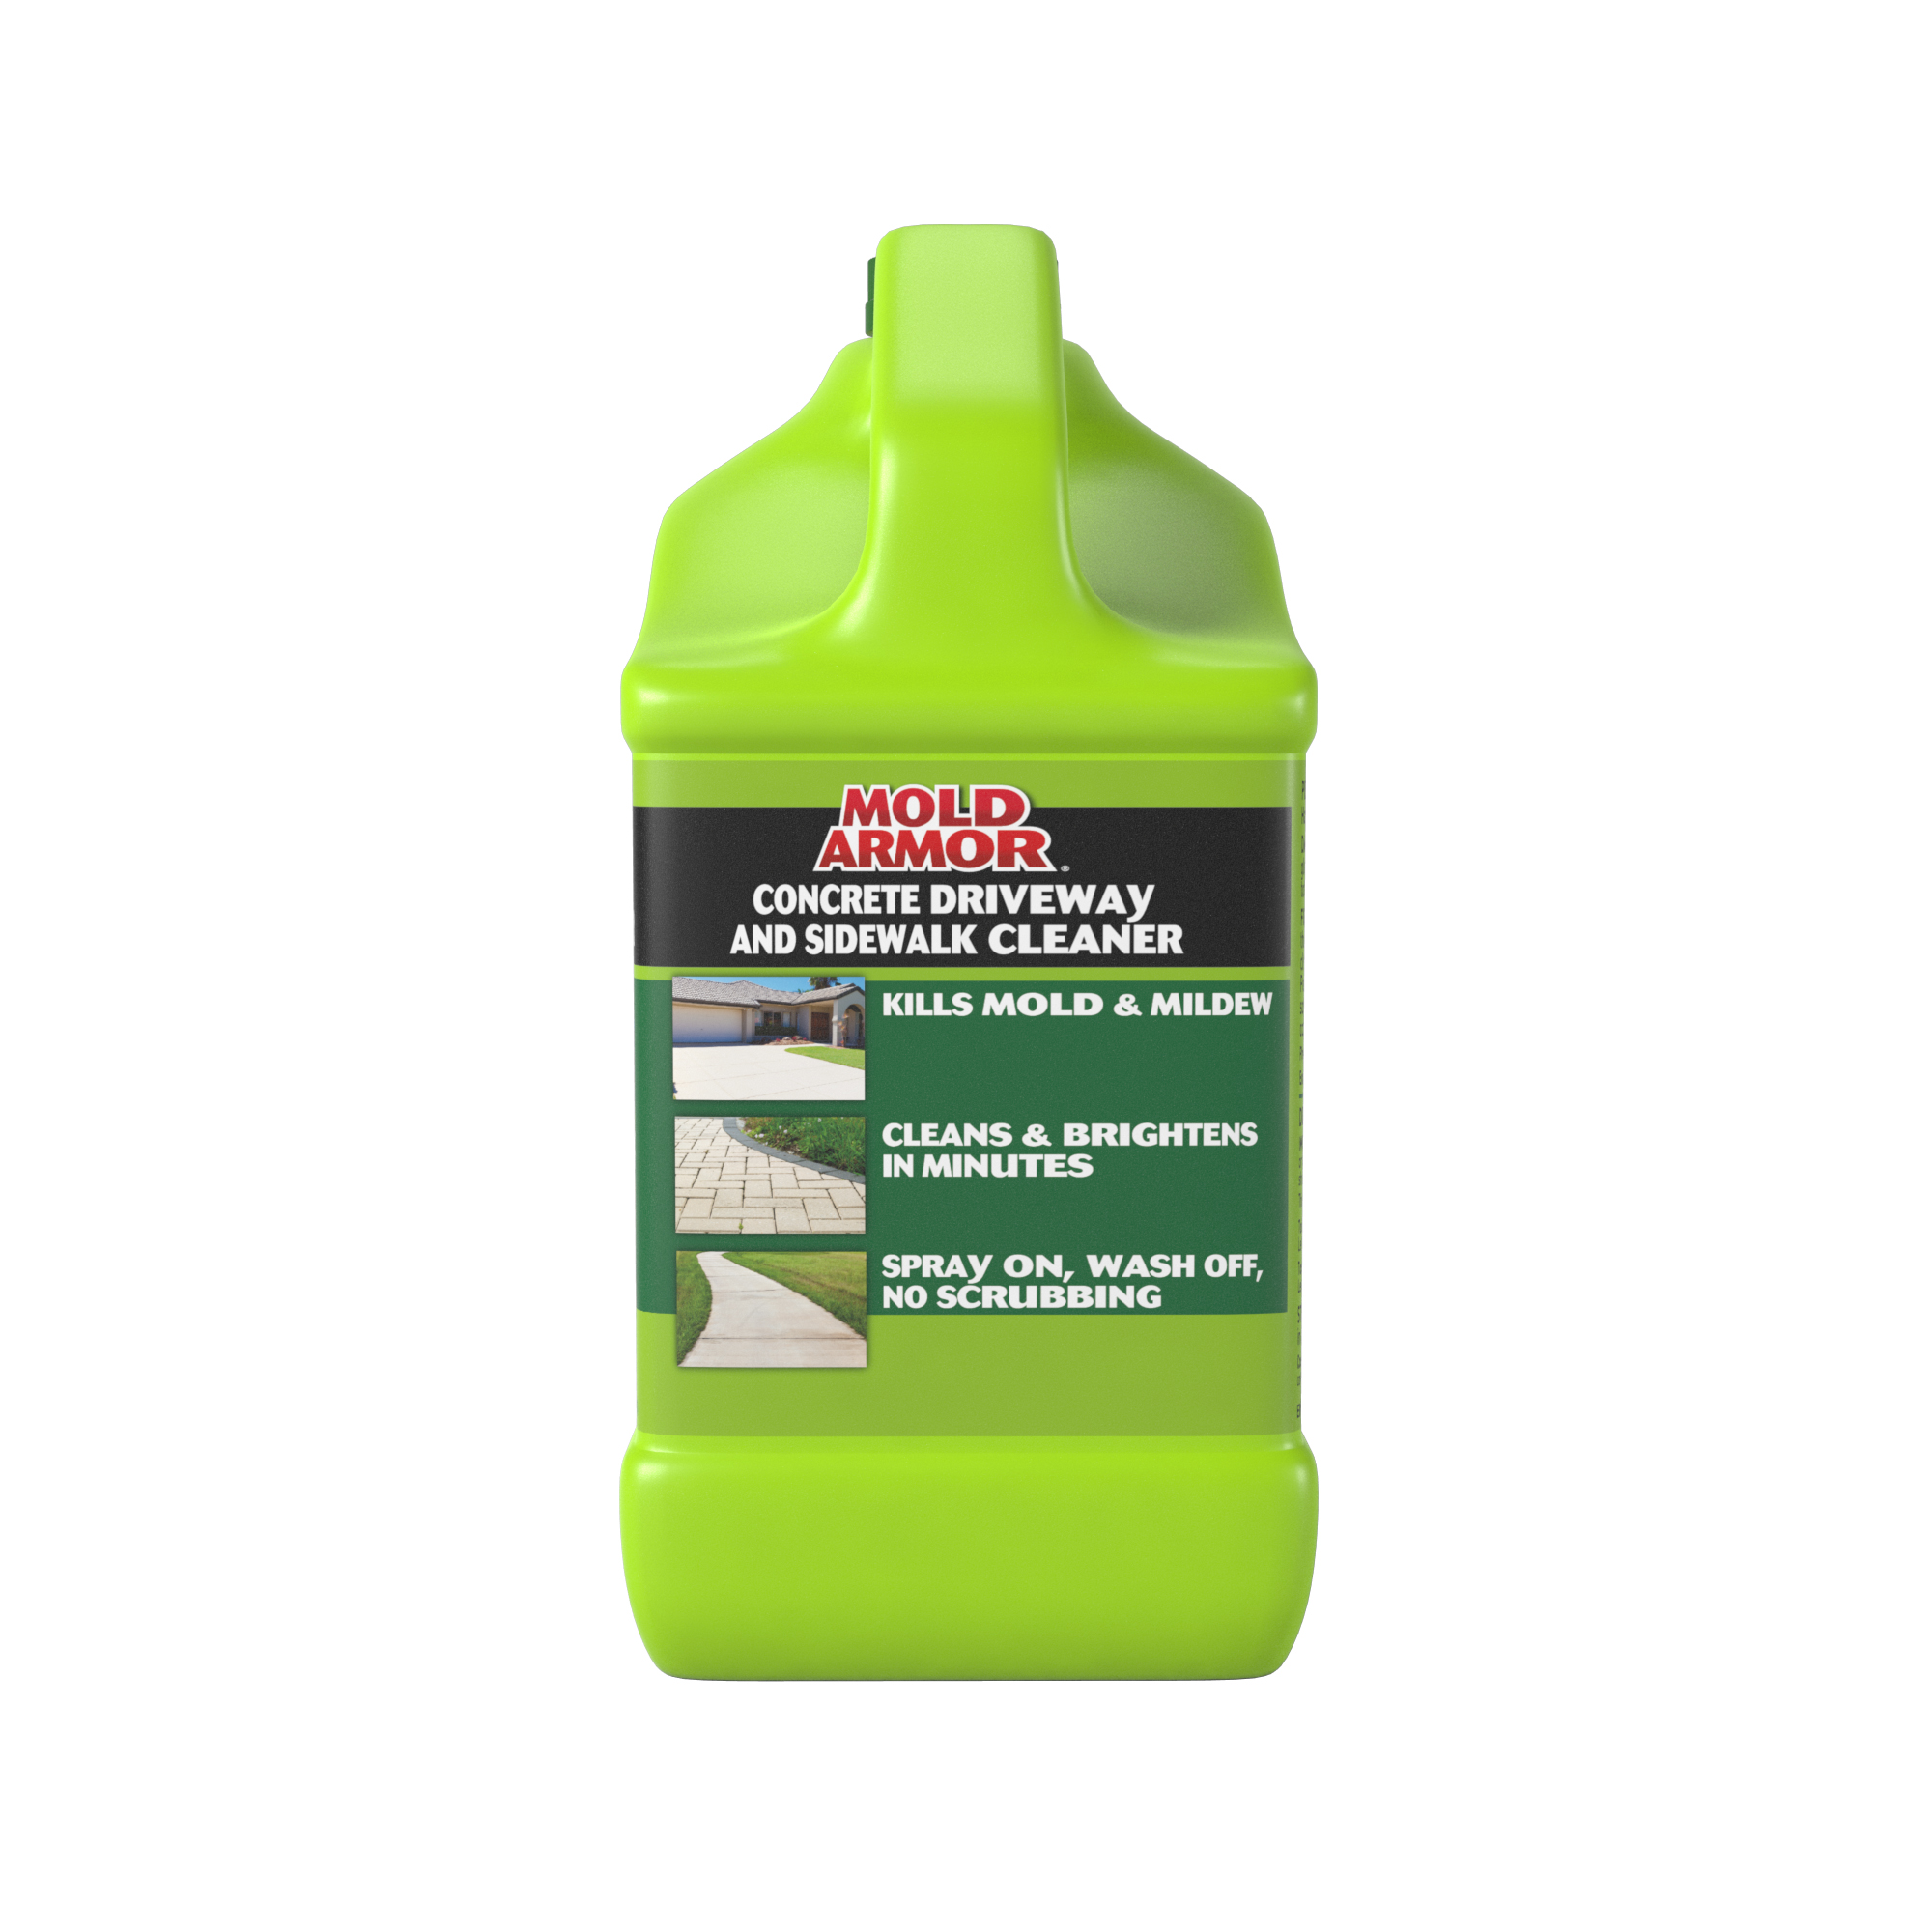 SRW Products Mold, Moss and Mildew Outdoor Surface Cleaner (1QT) –